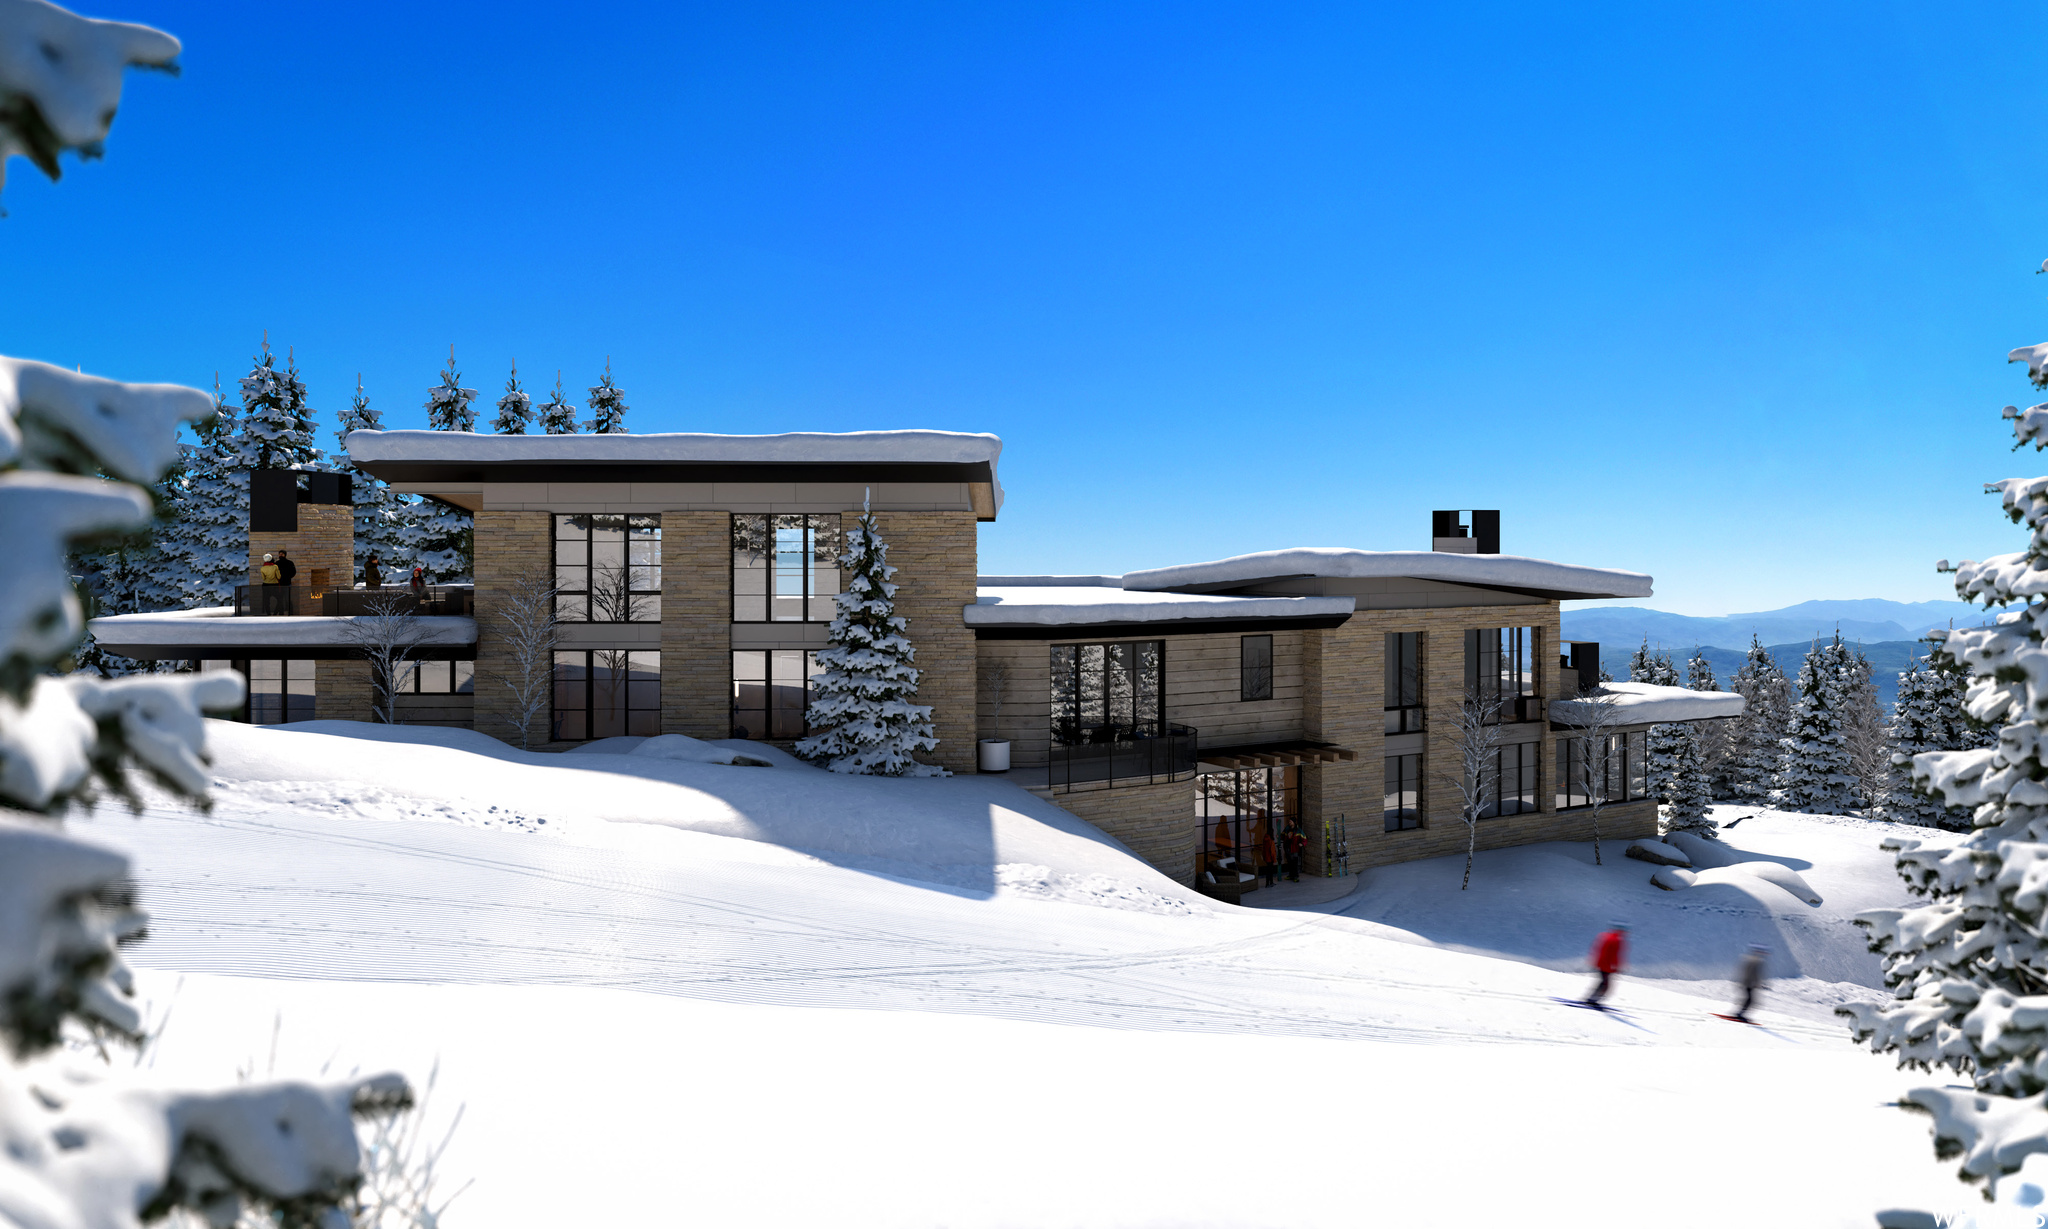 7932 RED TAIL, Park City, Utah 84060, 9 Bedrooms Bedrooms, 47 Rooms Rooms,14 BathroomsBathrooms,Residential,For sale,RED TAIL,1903457